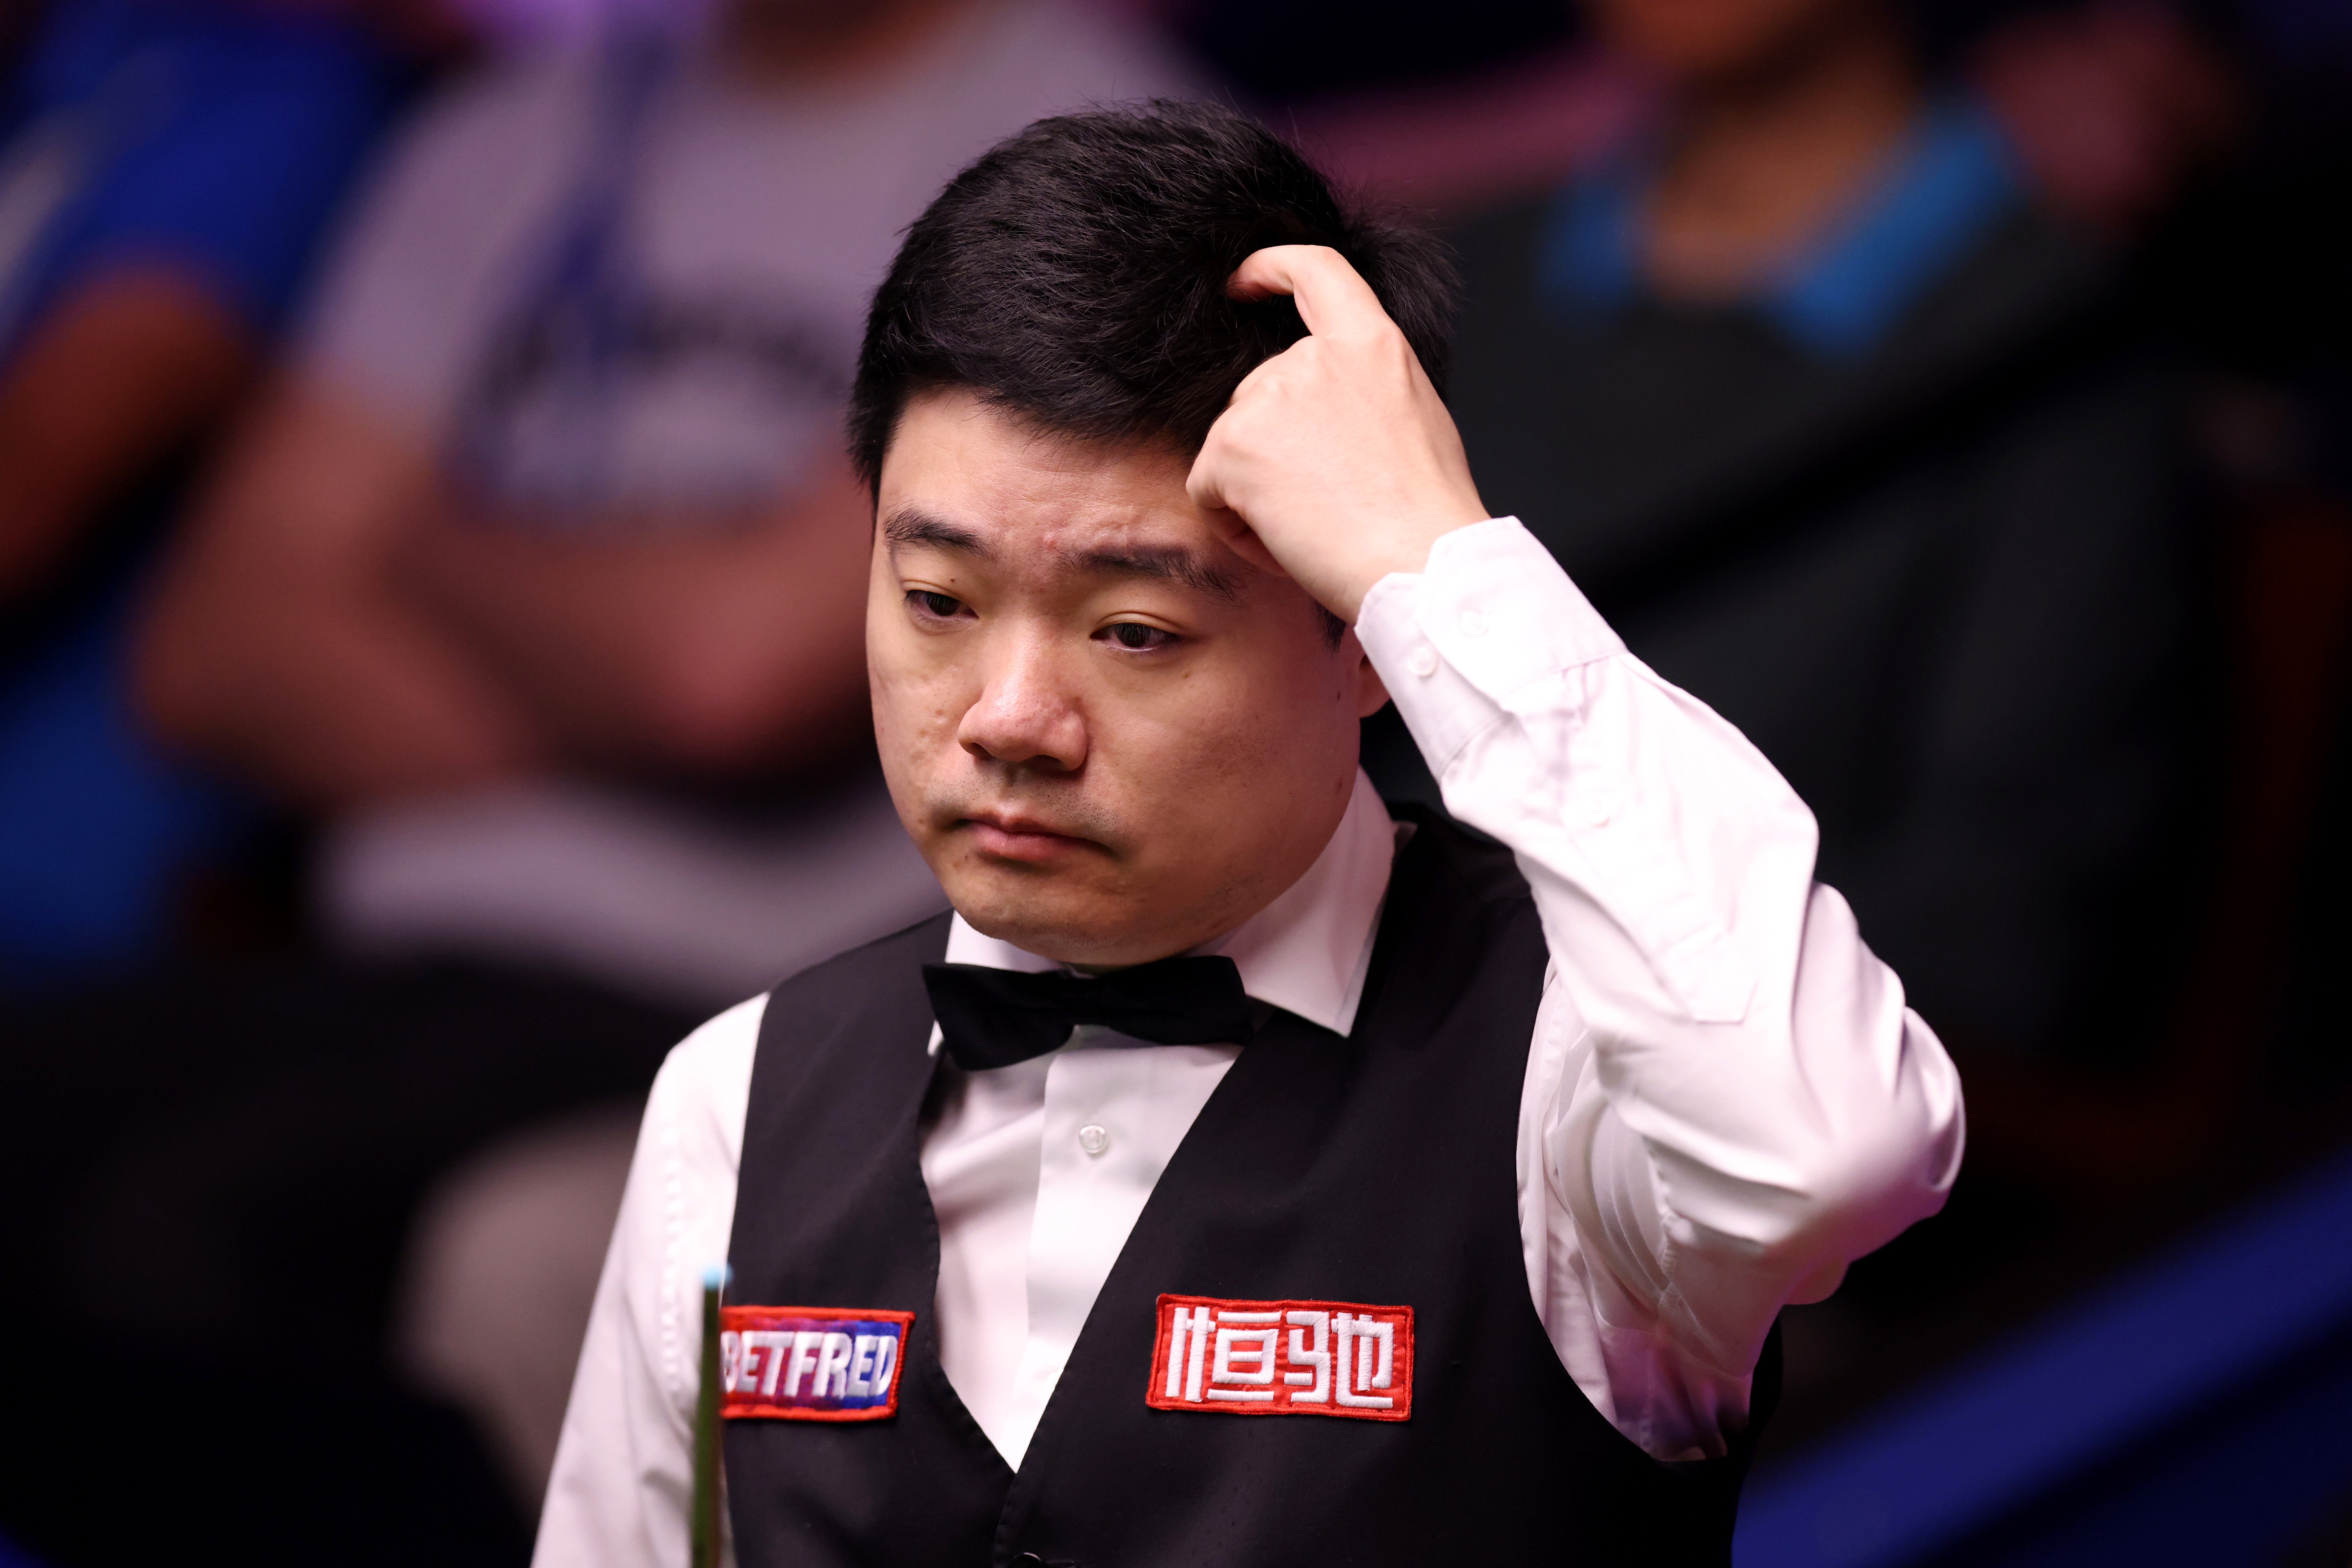 Ding Junhui had to go out and buy a new pair of black trousers